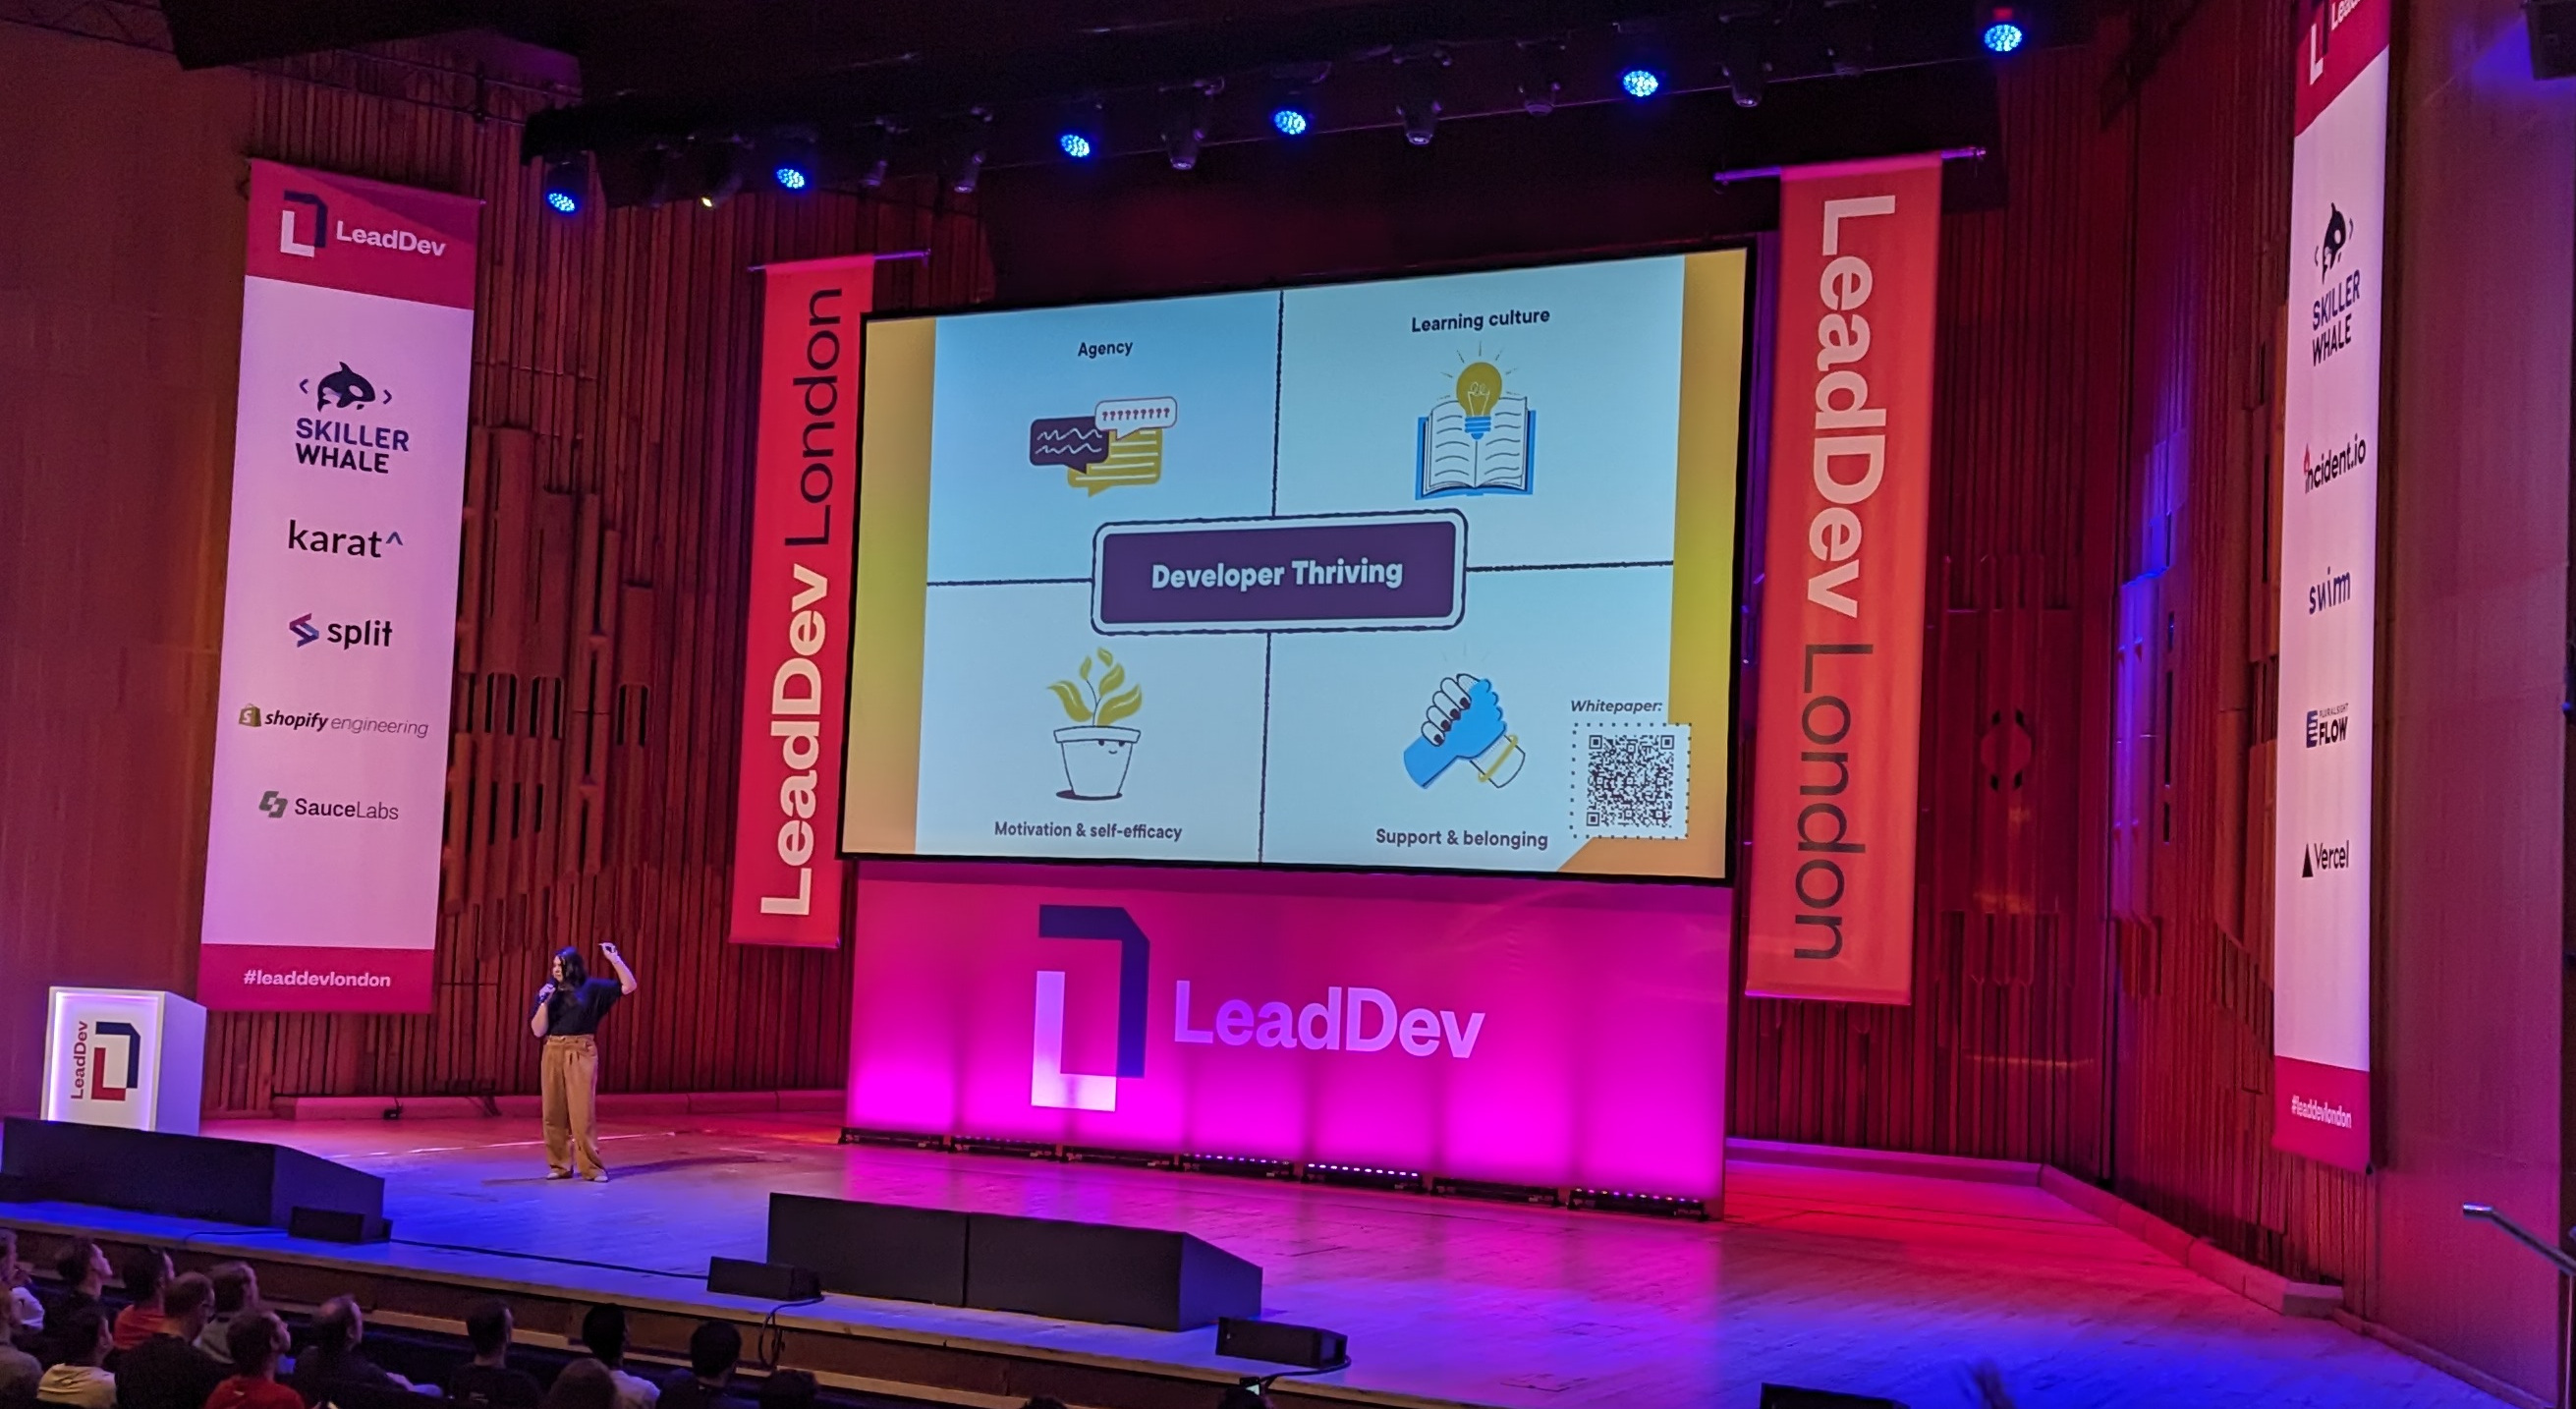 Cat Hicks on the stage at LeadDev in front of a slide split up into four quadrants around the title "Developer Thriving", with each quadrant having an illustration that aligns with the title. The quadrants are Agency, Learning culture, Motivation & self-efficacy and Support & belonging